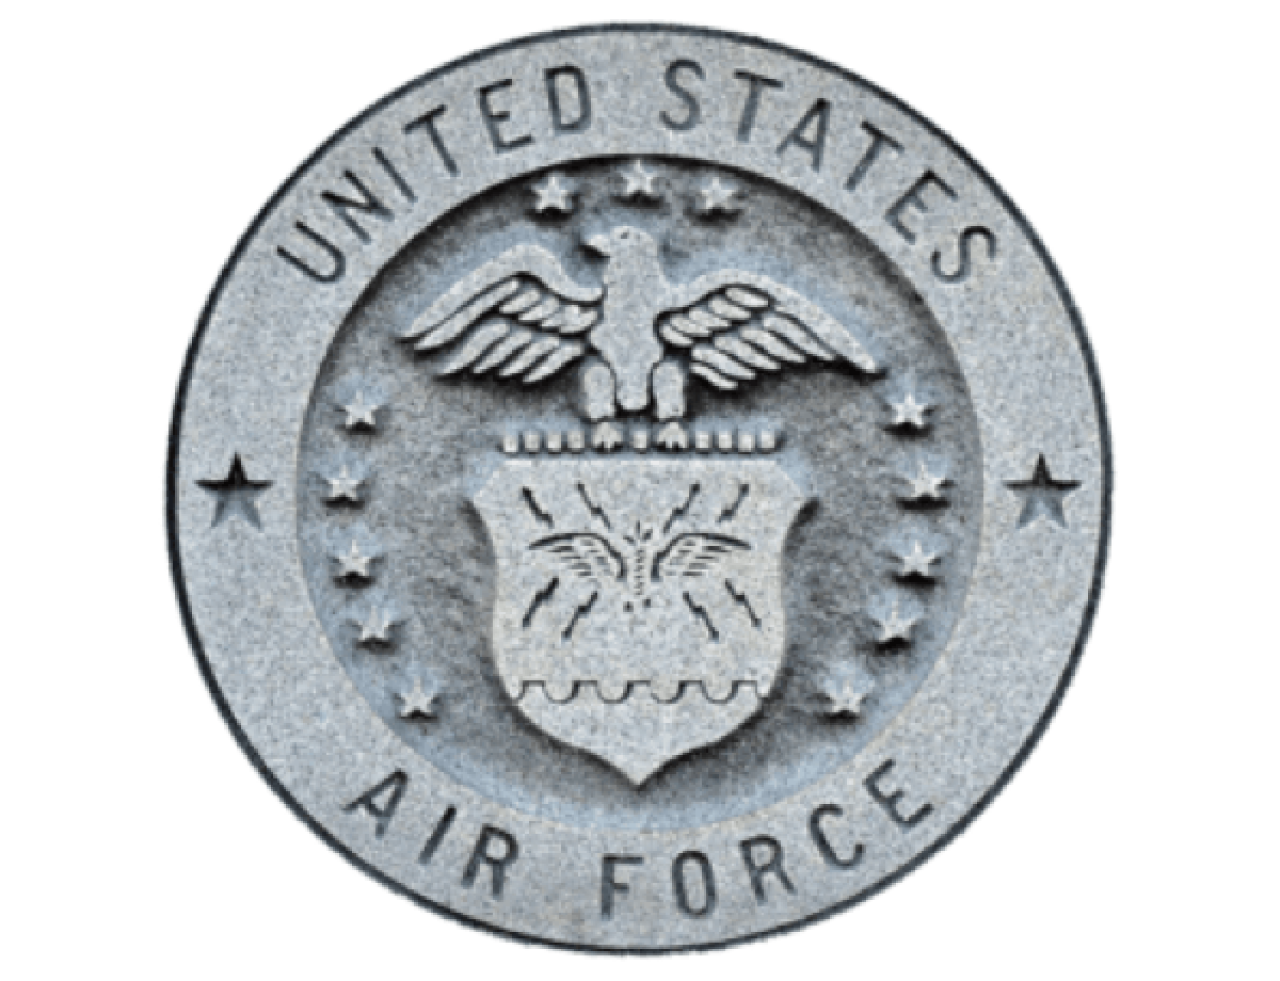 United States Air Force logo.